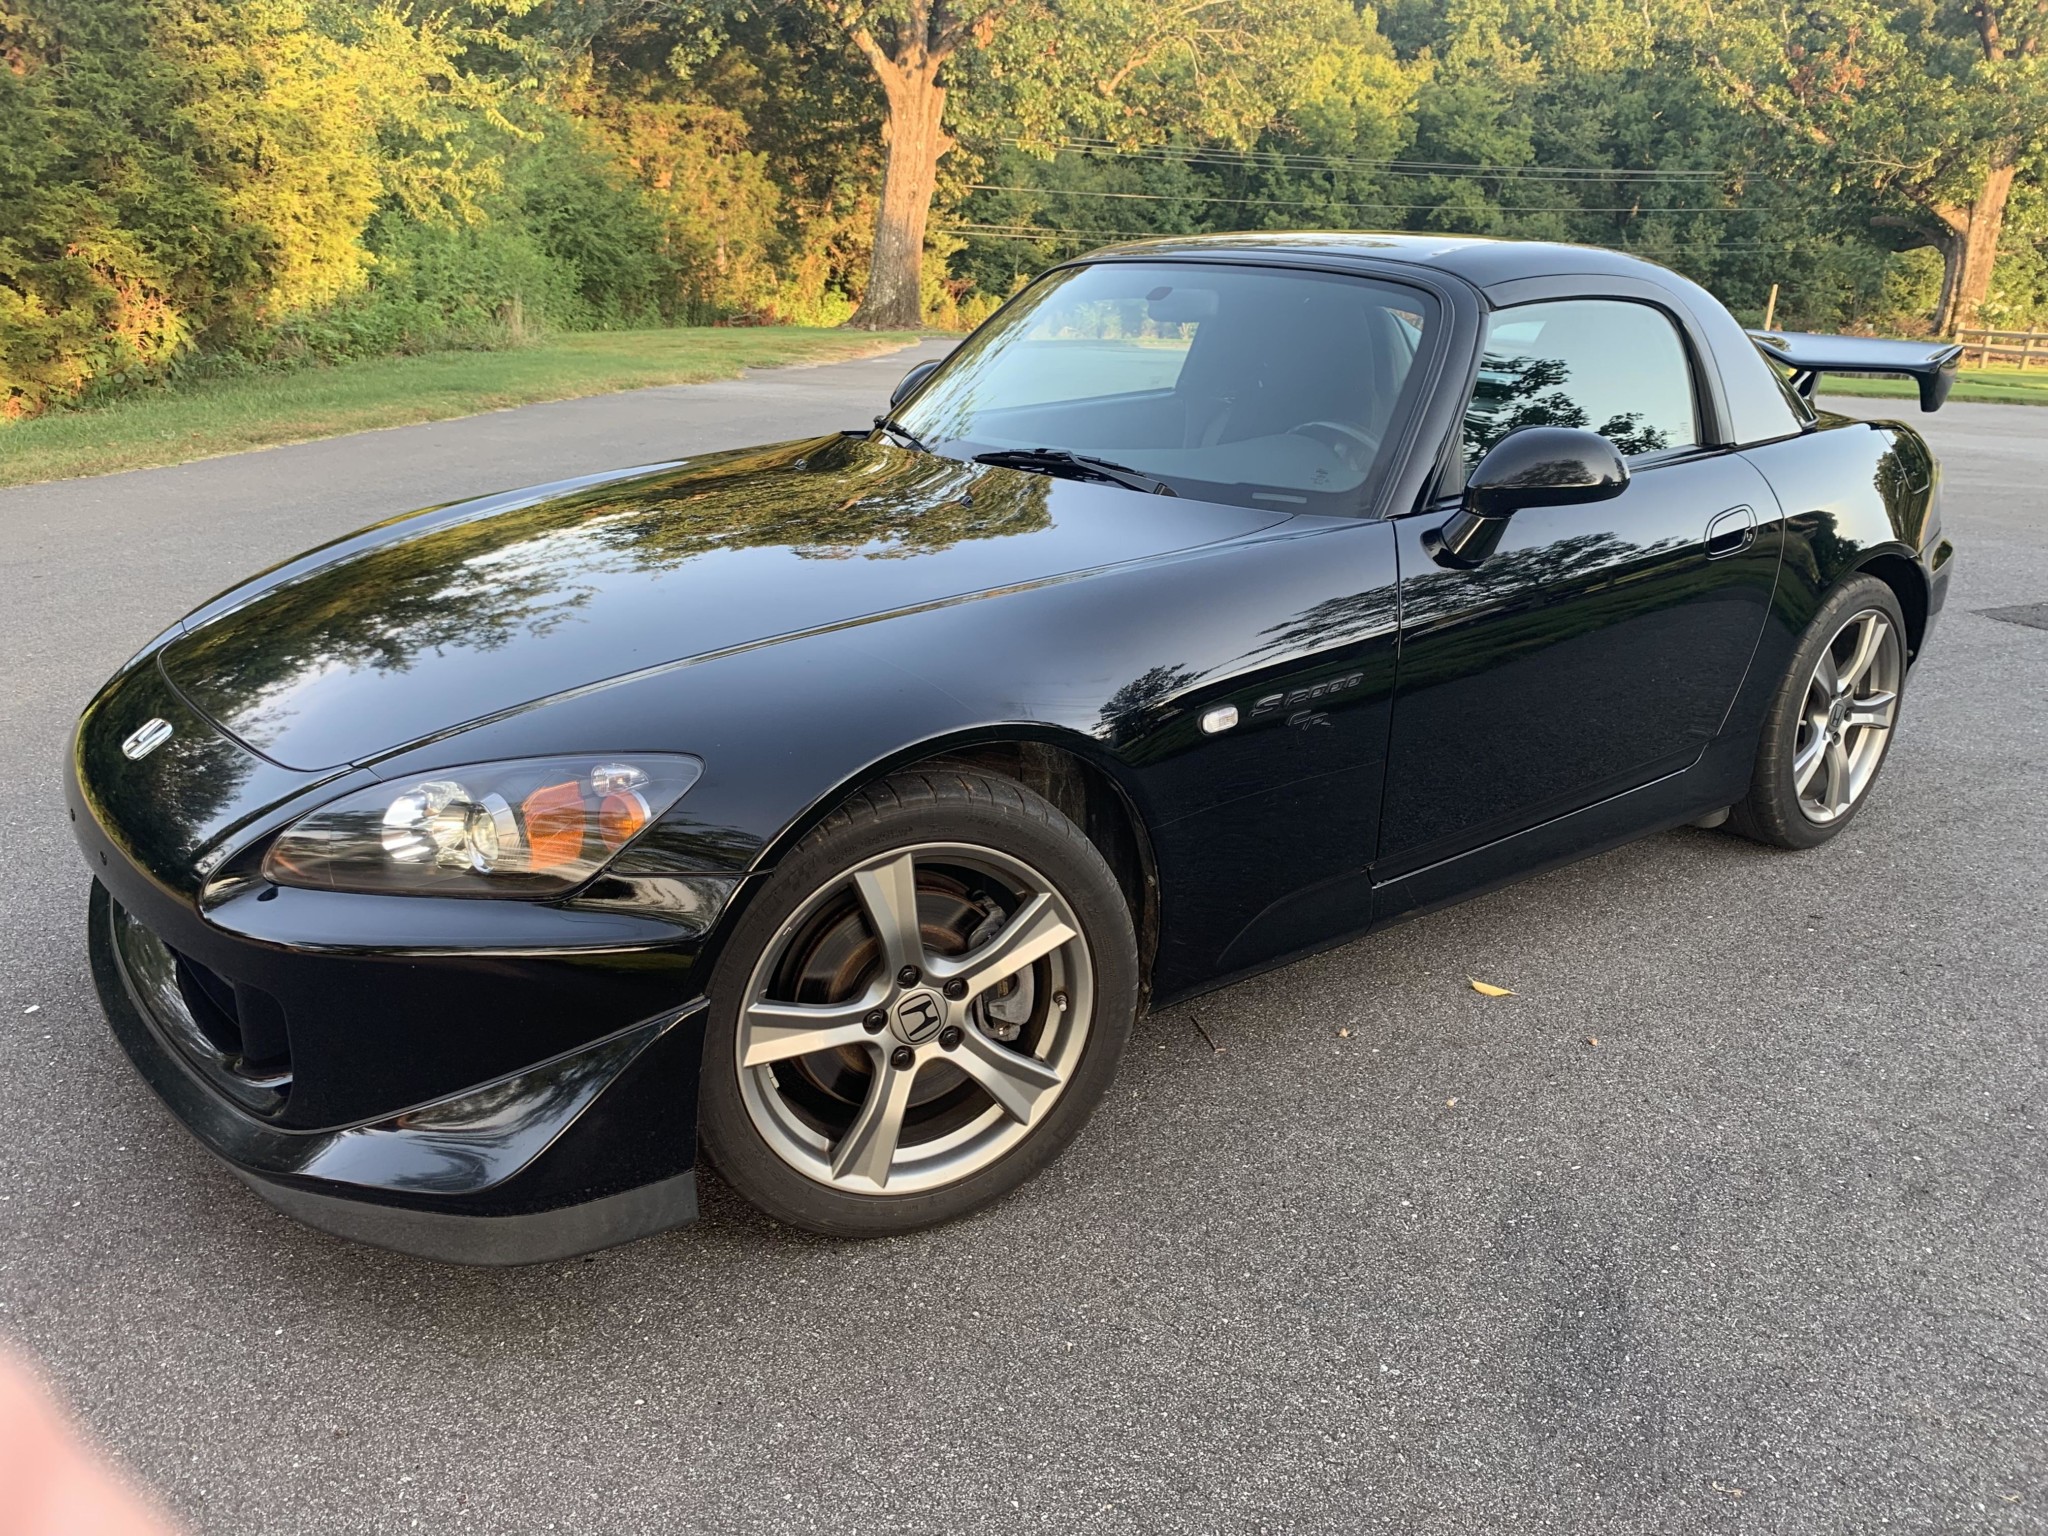 Black Honda S2000 Club Racer Is Very Rare, Desirable, And Relatively ...